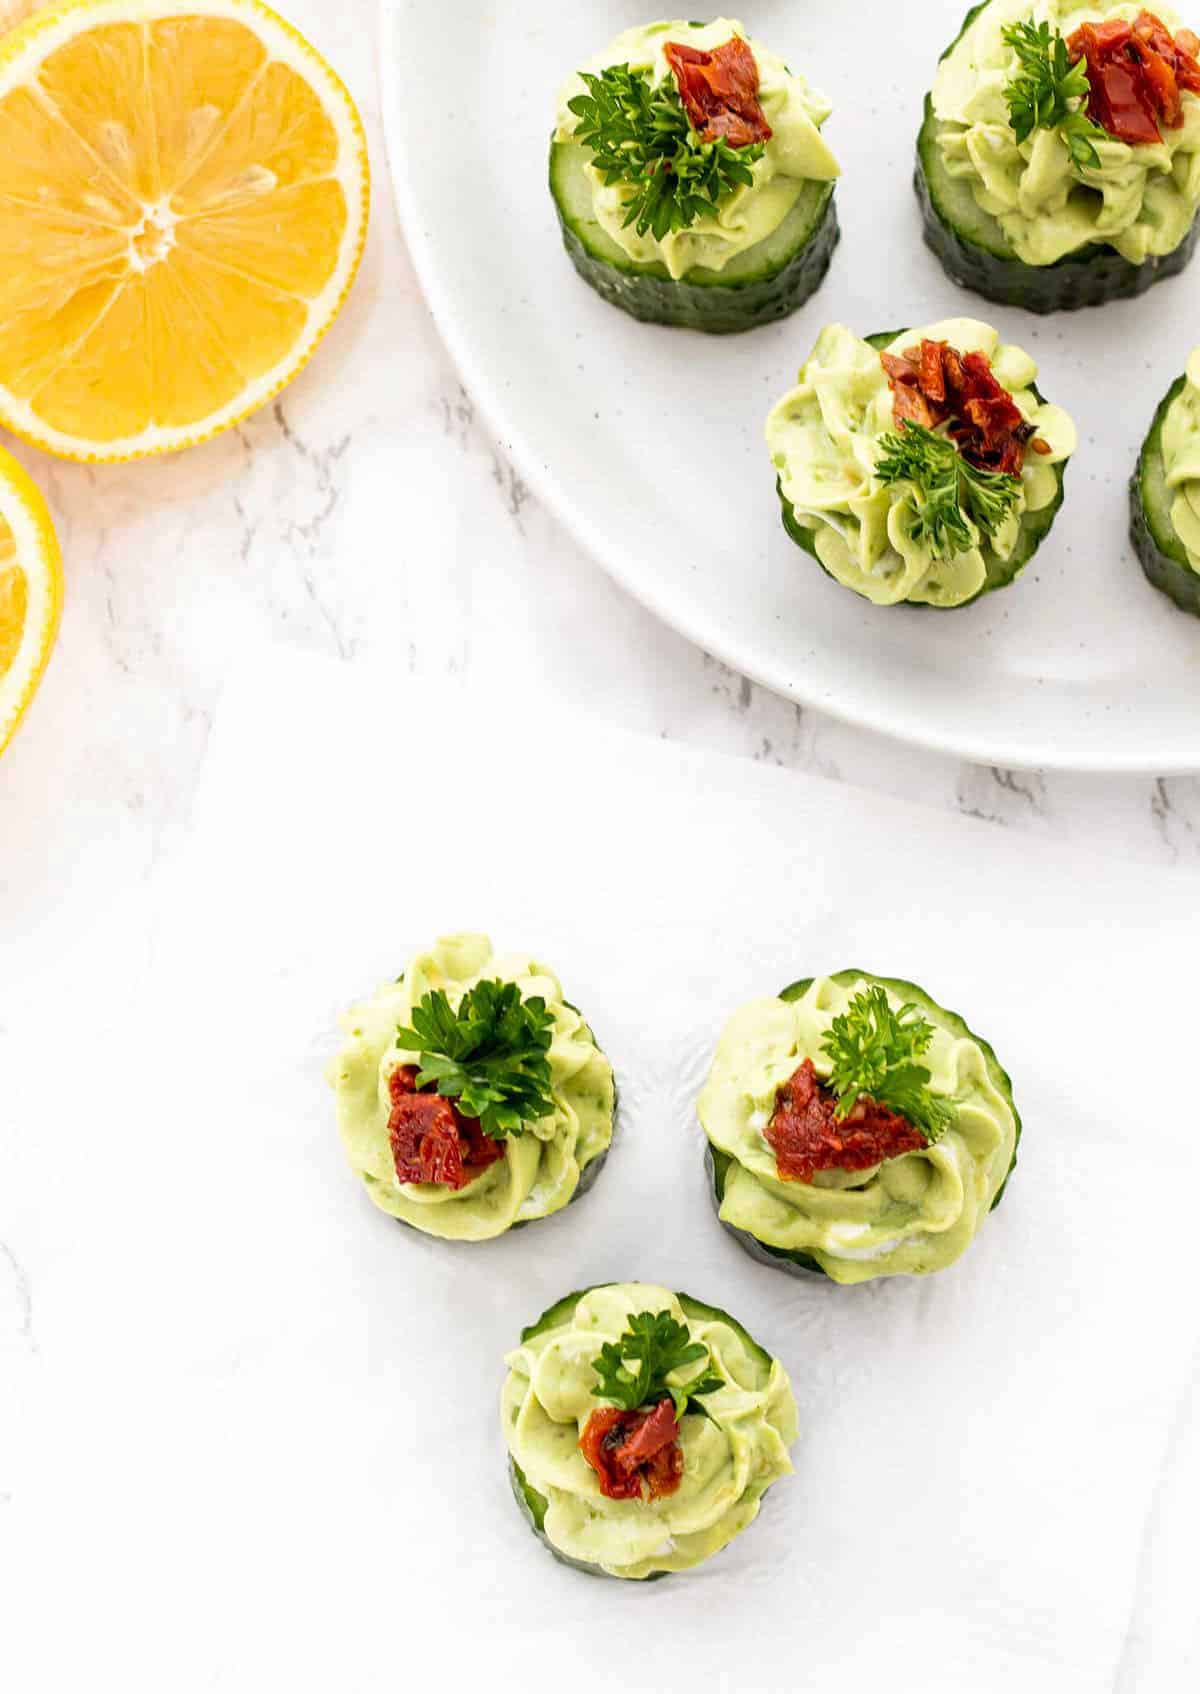 A plate of cucumber rounds topped with green avocado mousse and garnished with sundried tomatoes and parsley.